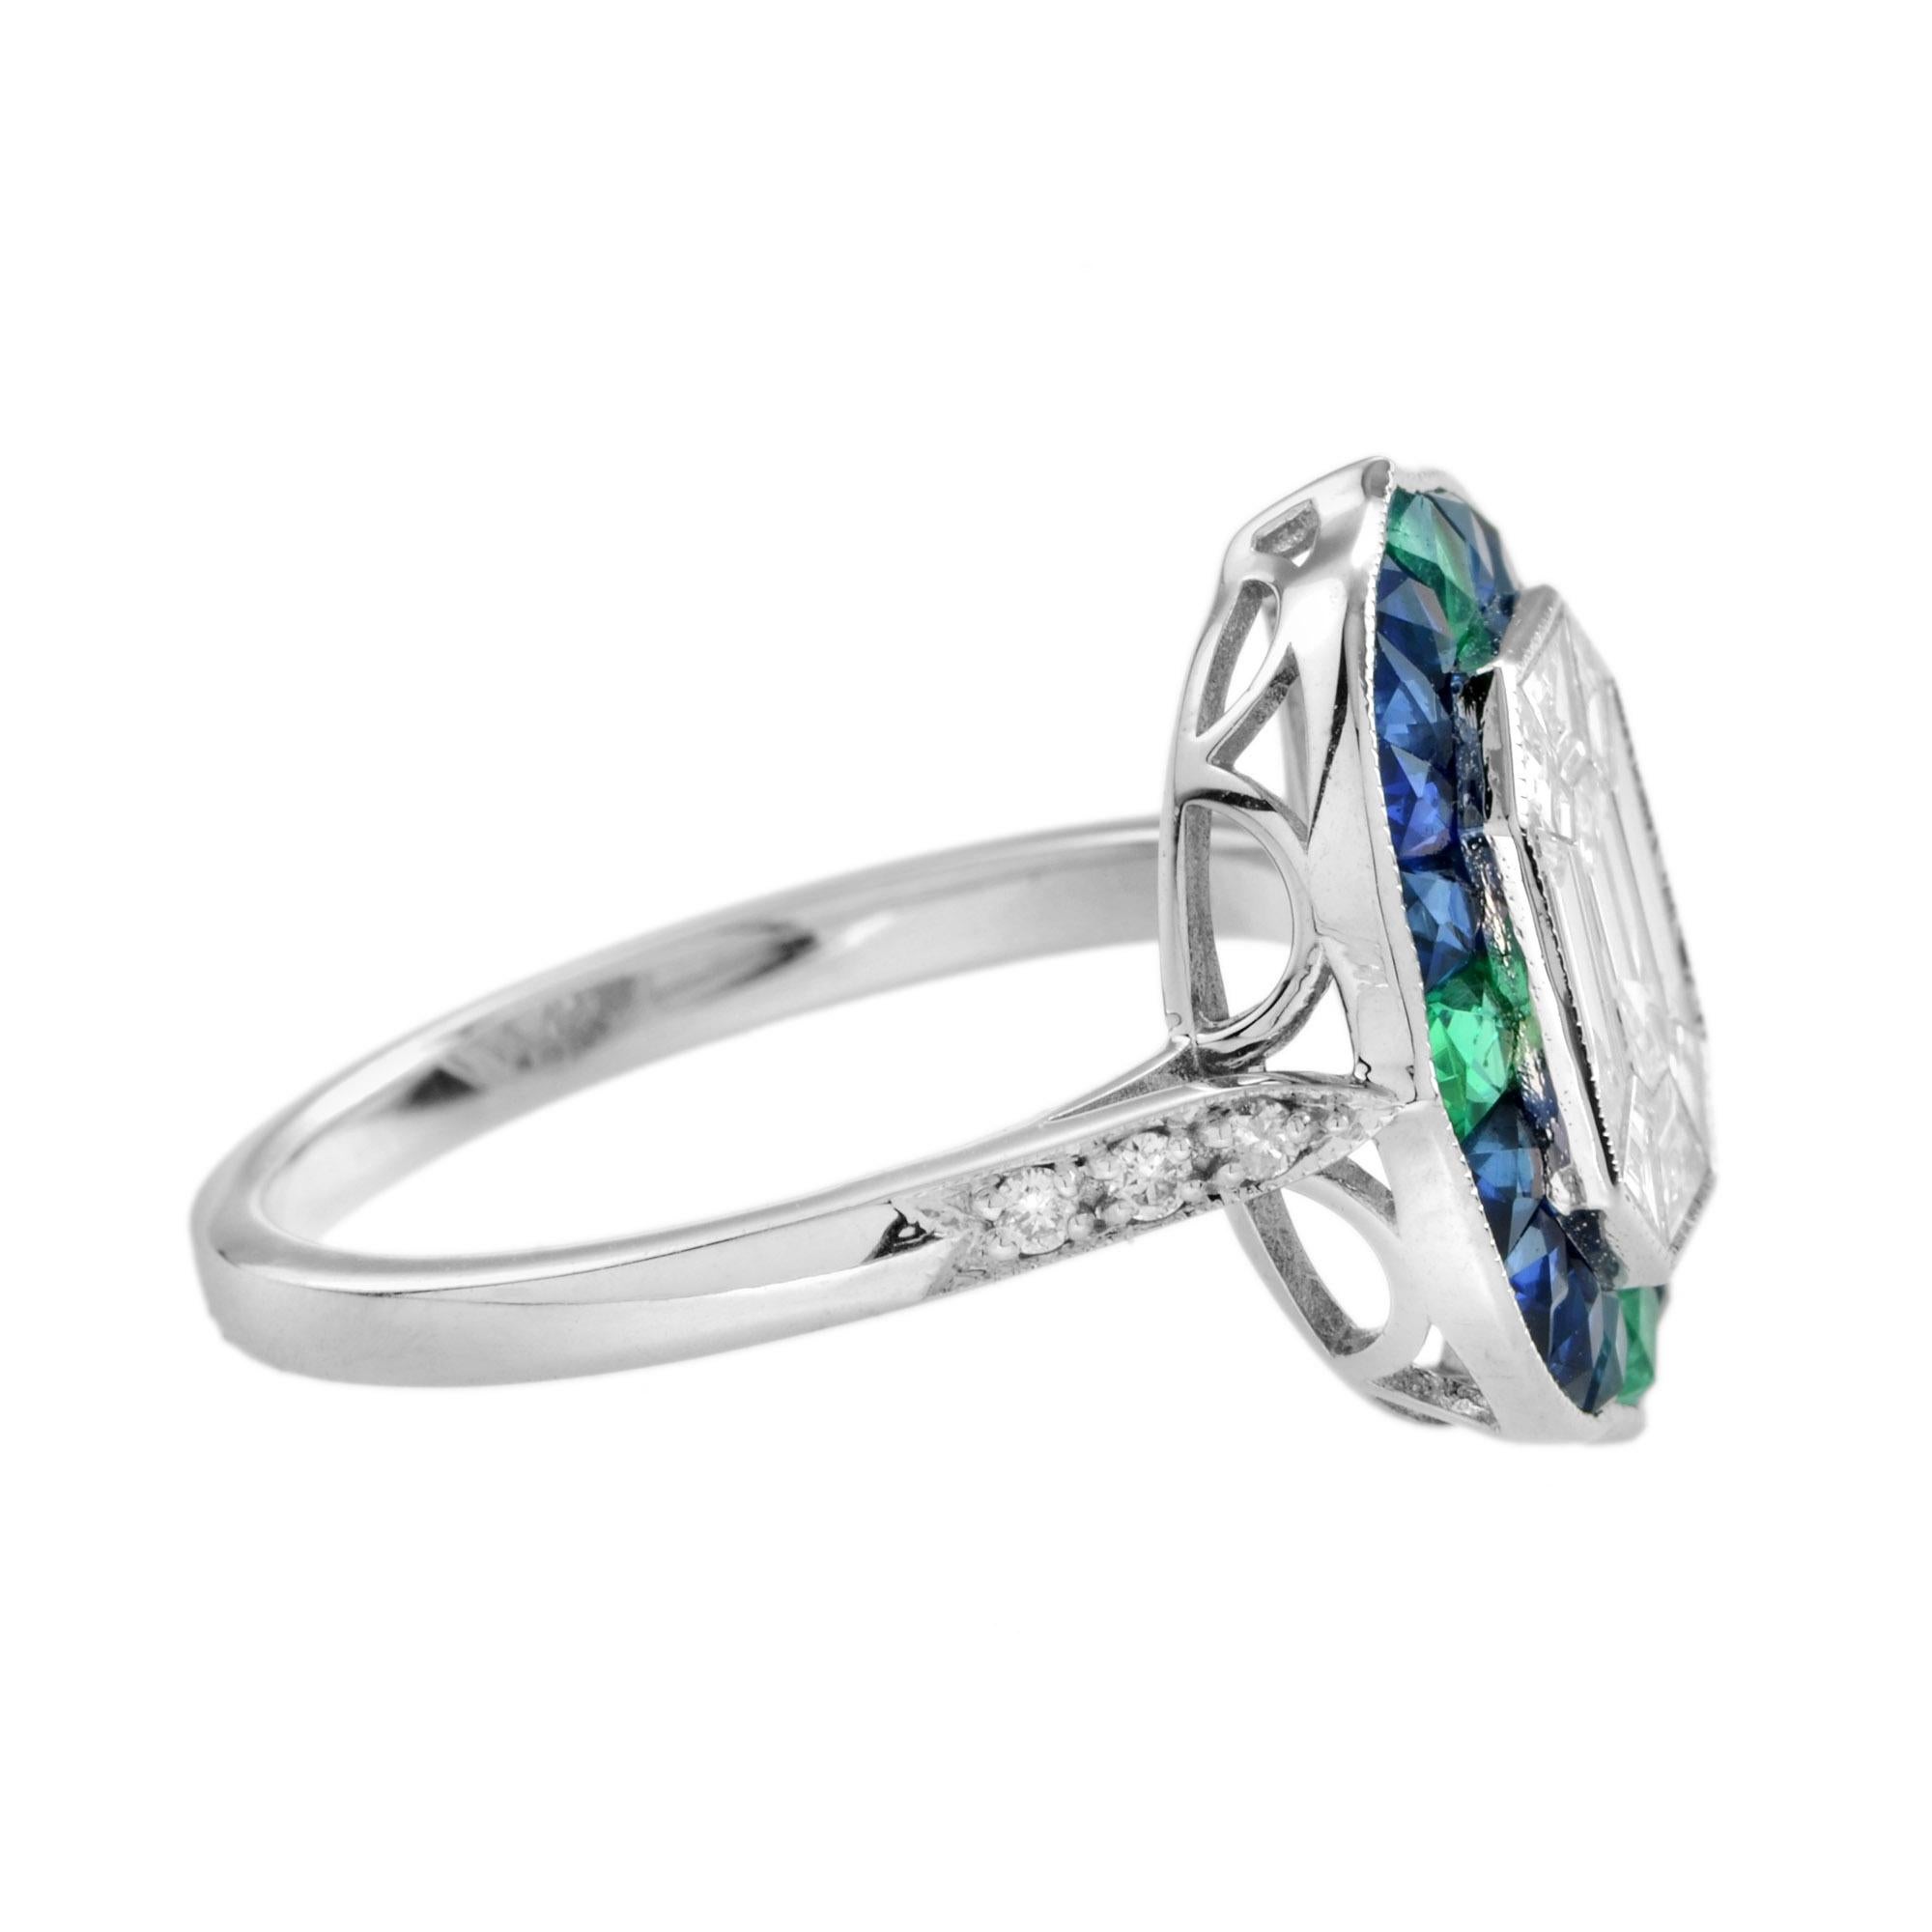 For Sale:  Illusion Setting Diamond with Sapphire Emerald Art Deco Style Ring in 18k Gold 5